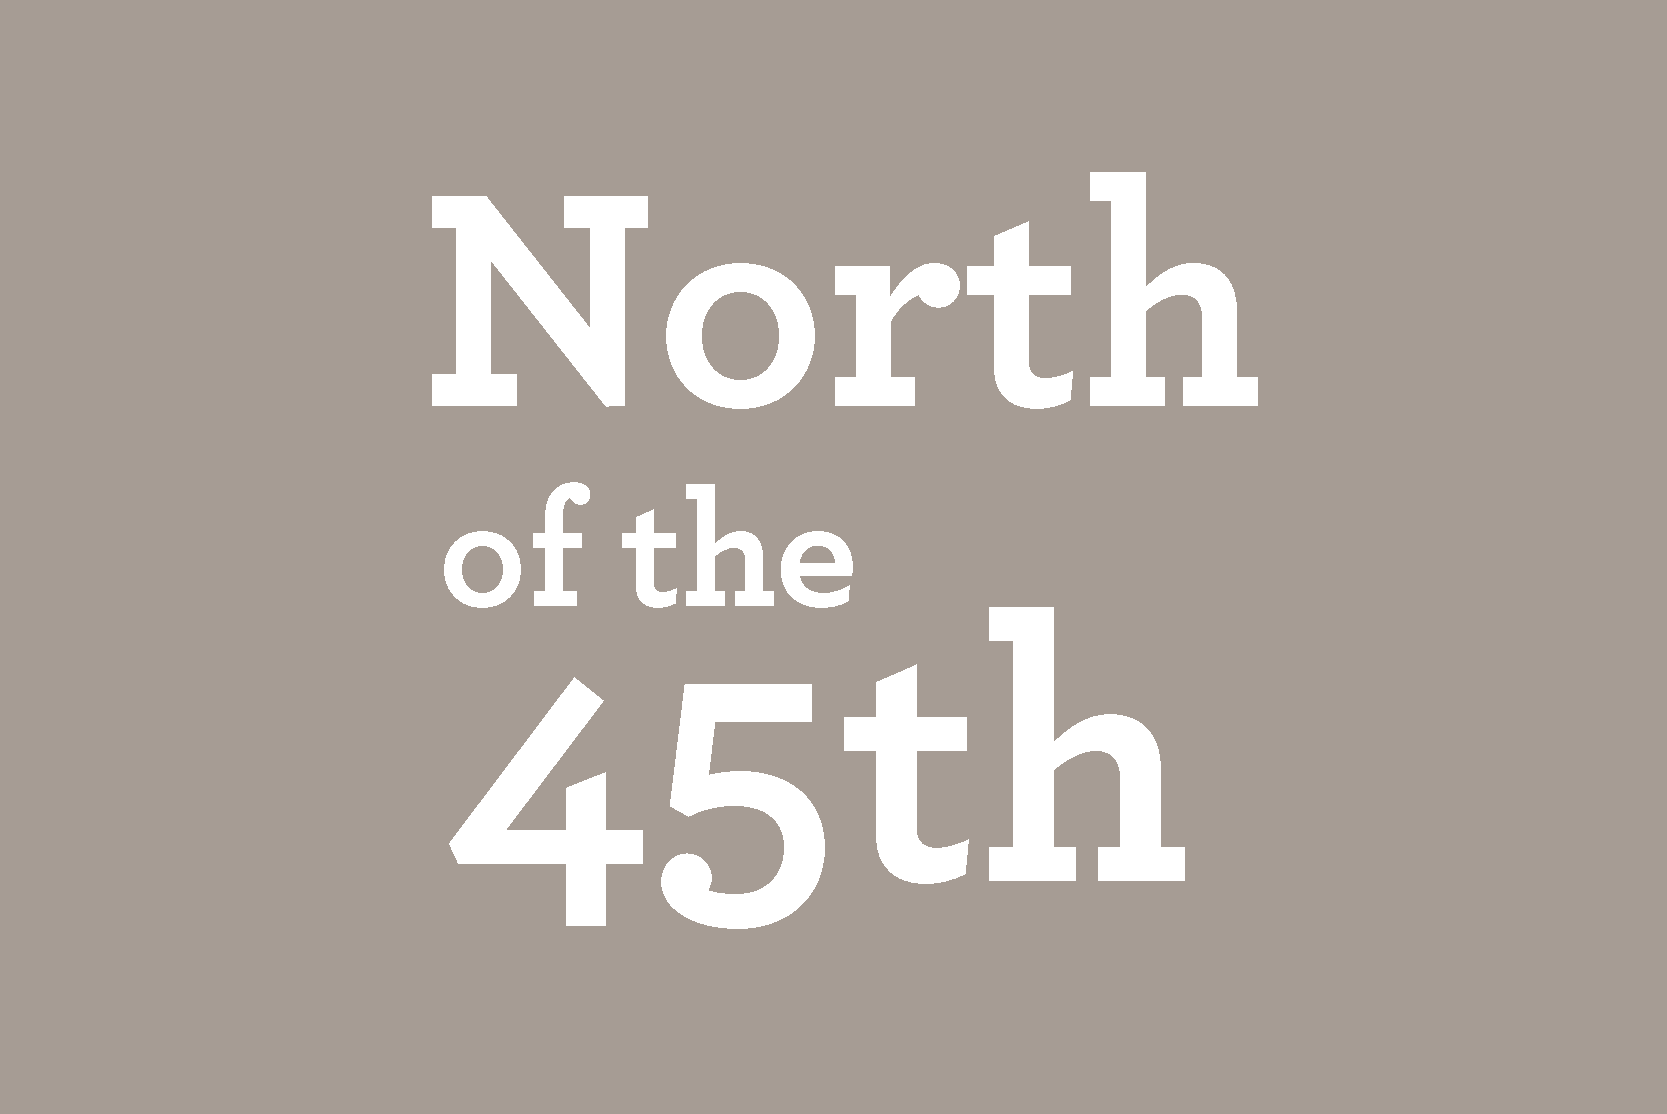 grey backgound with white text "North of the 45th"